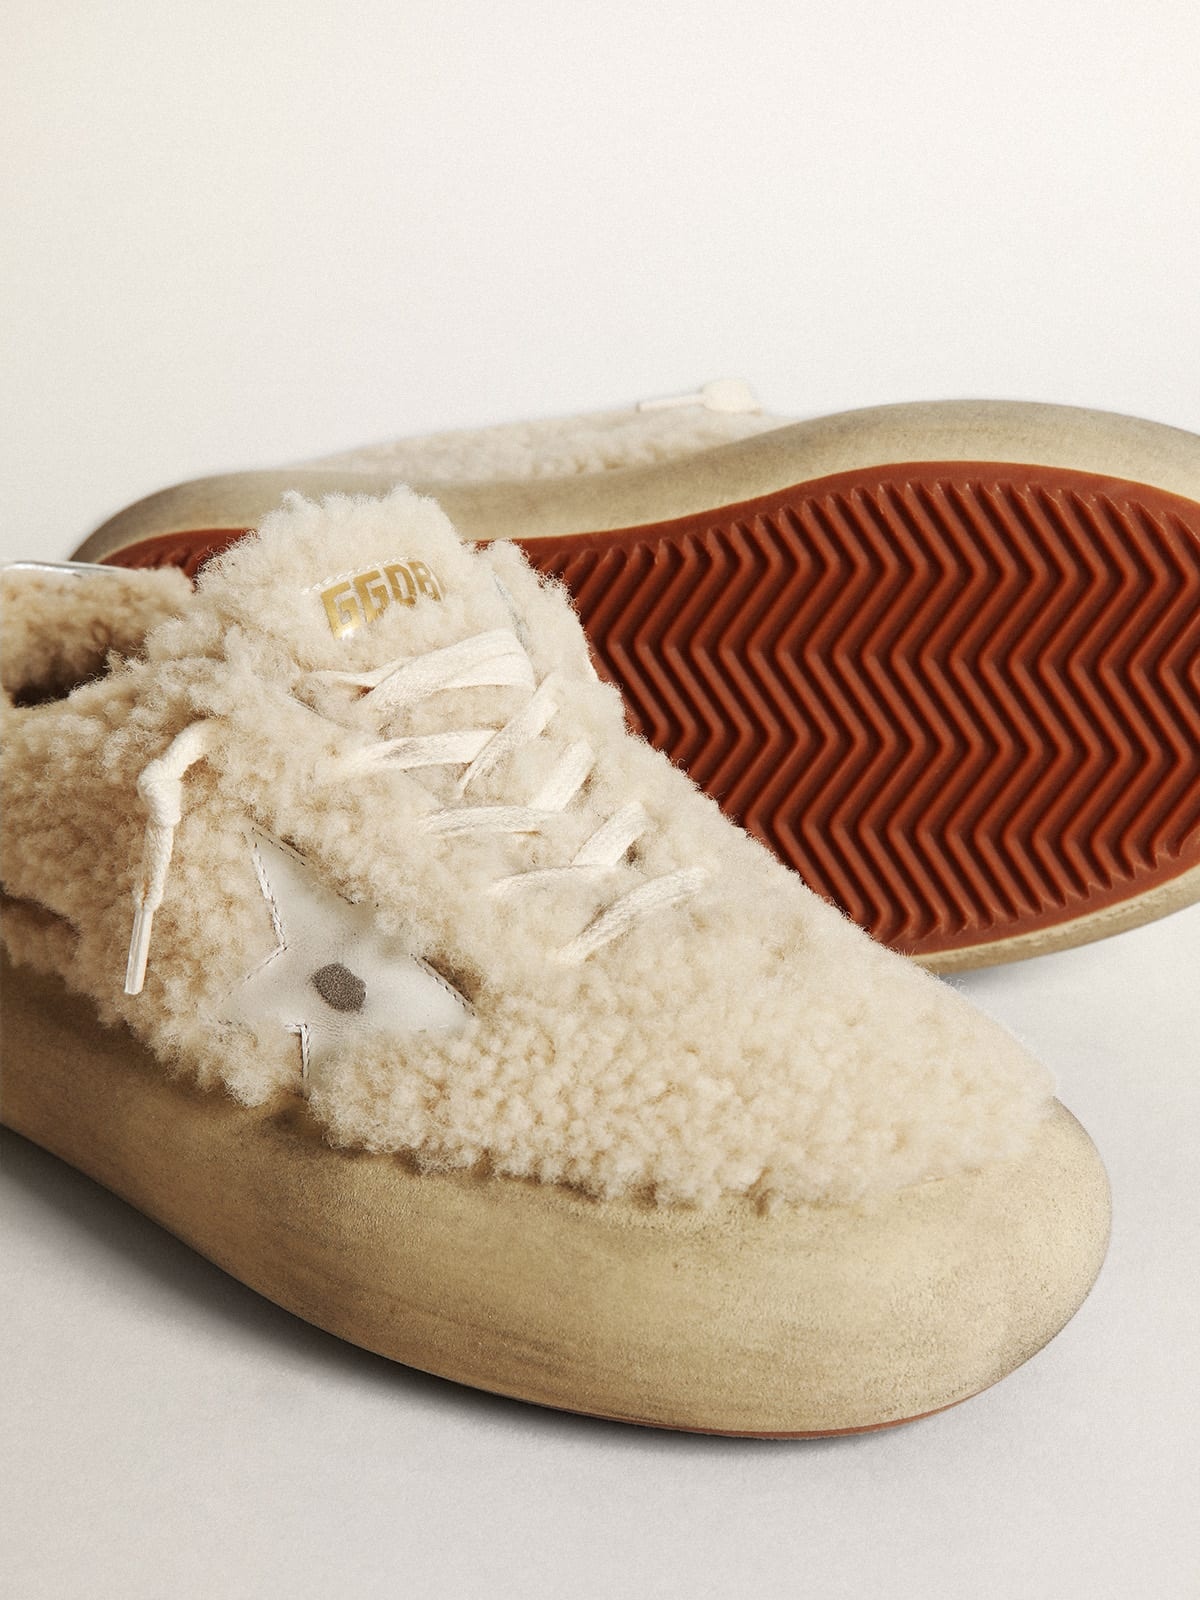 Women’s Space-Star shoes in beige shearling with white leather star and metallic leather heel tab - 4